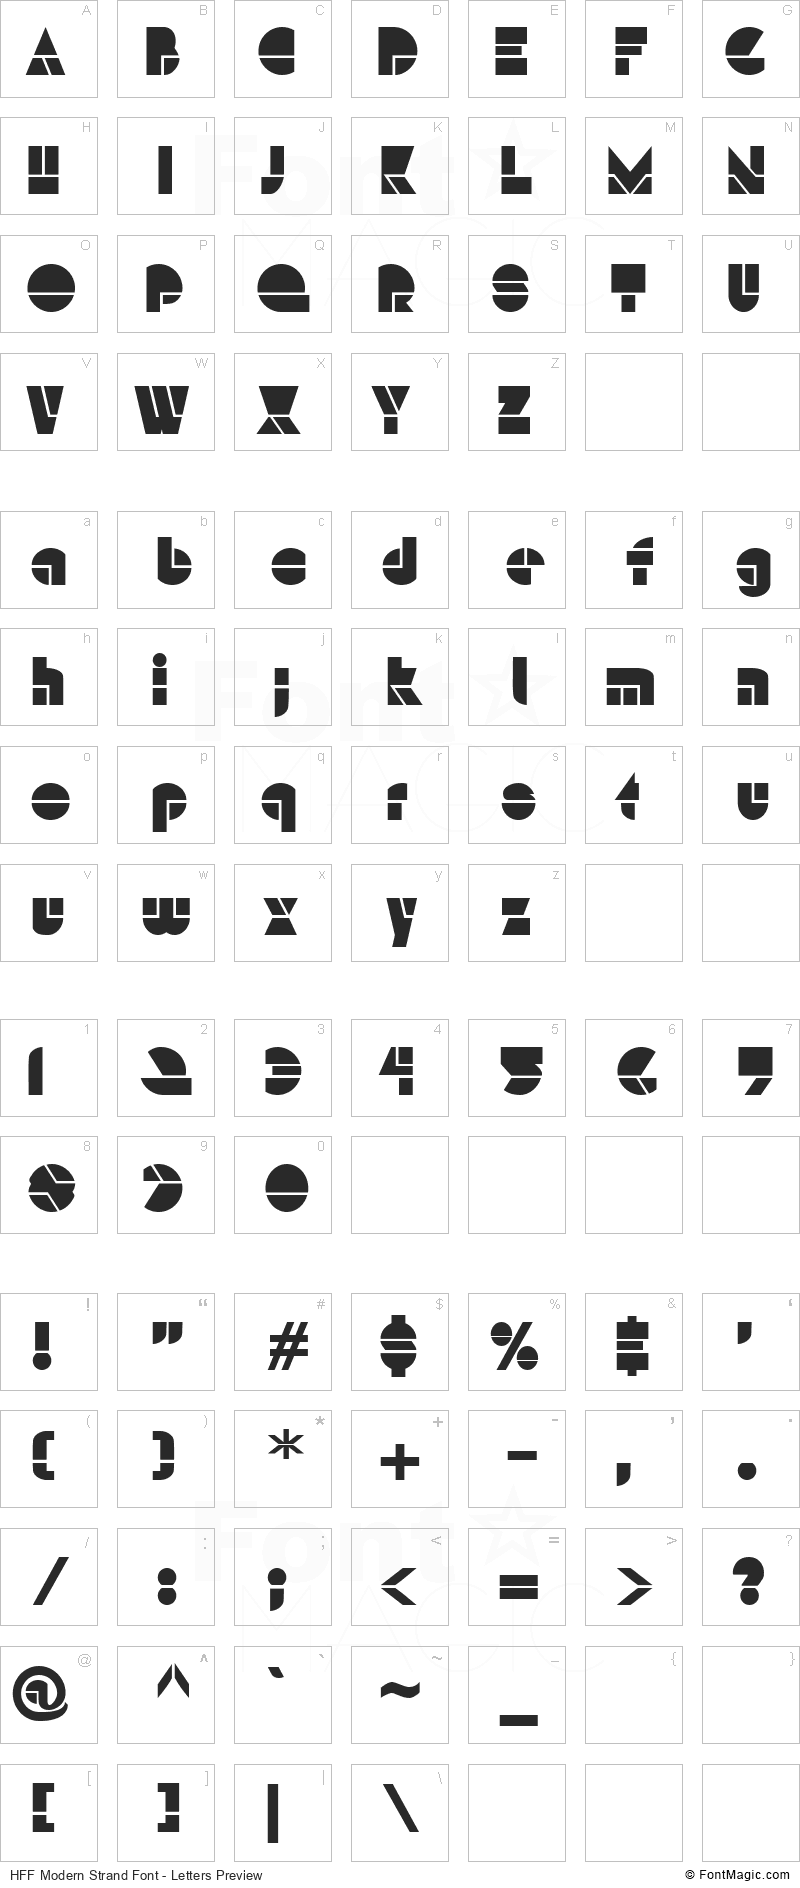 HFF Modern Strand Font - All Latters Preview Chart